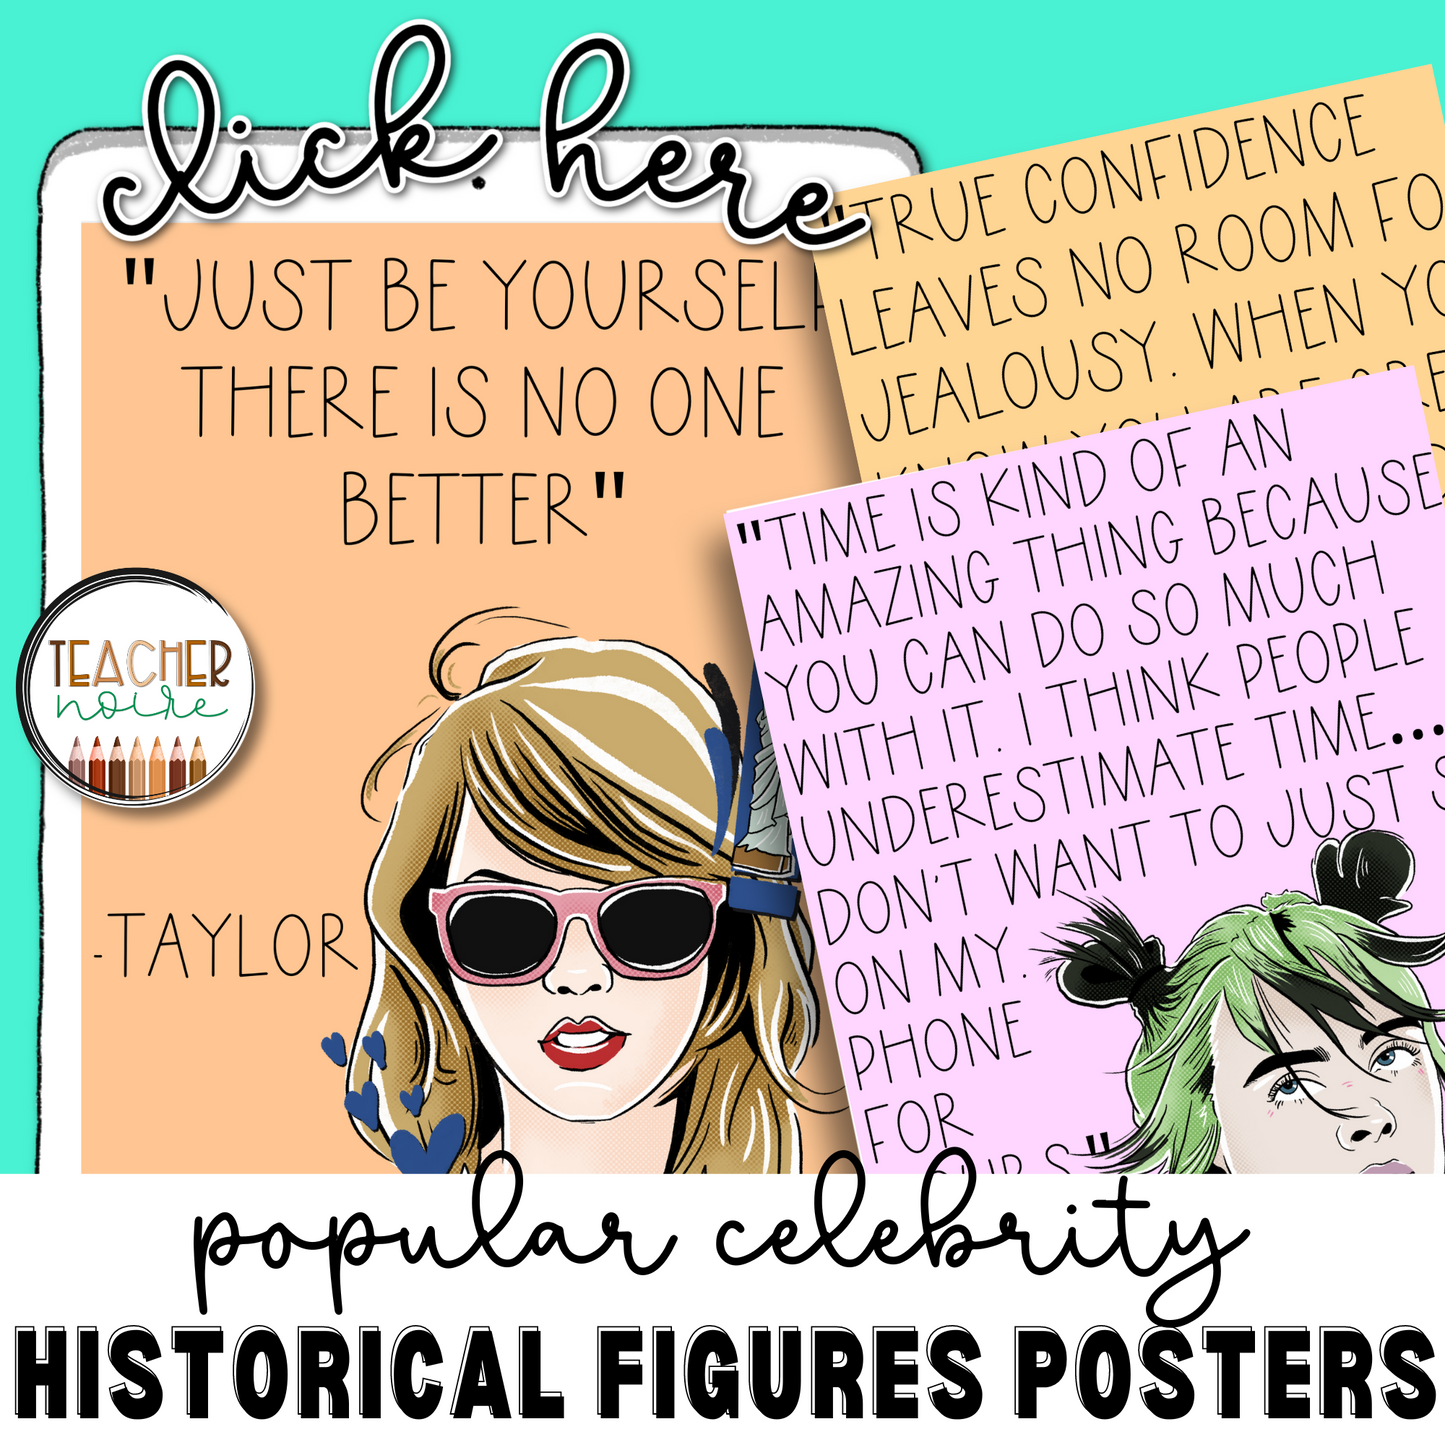 Influential/ Historical Figures Posters